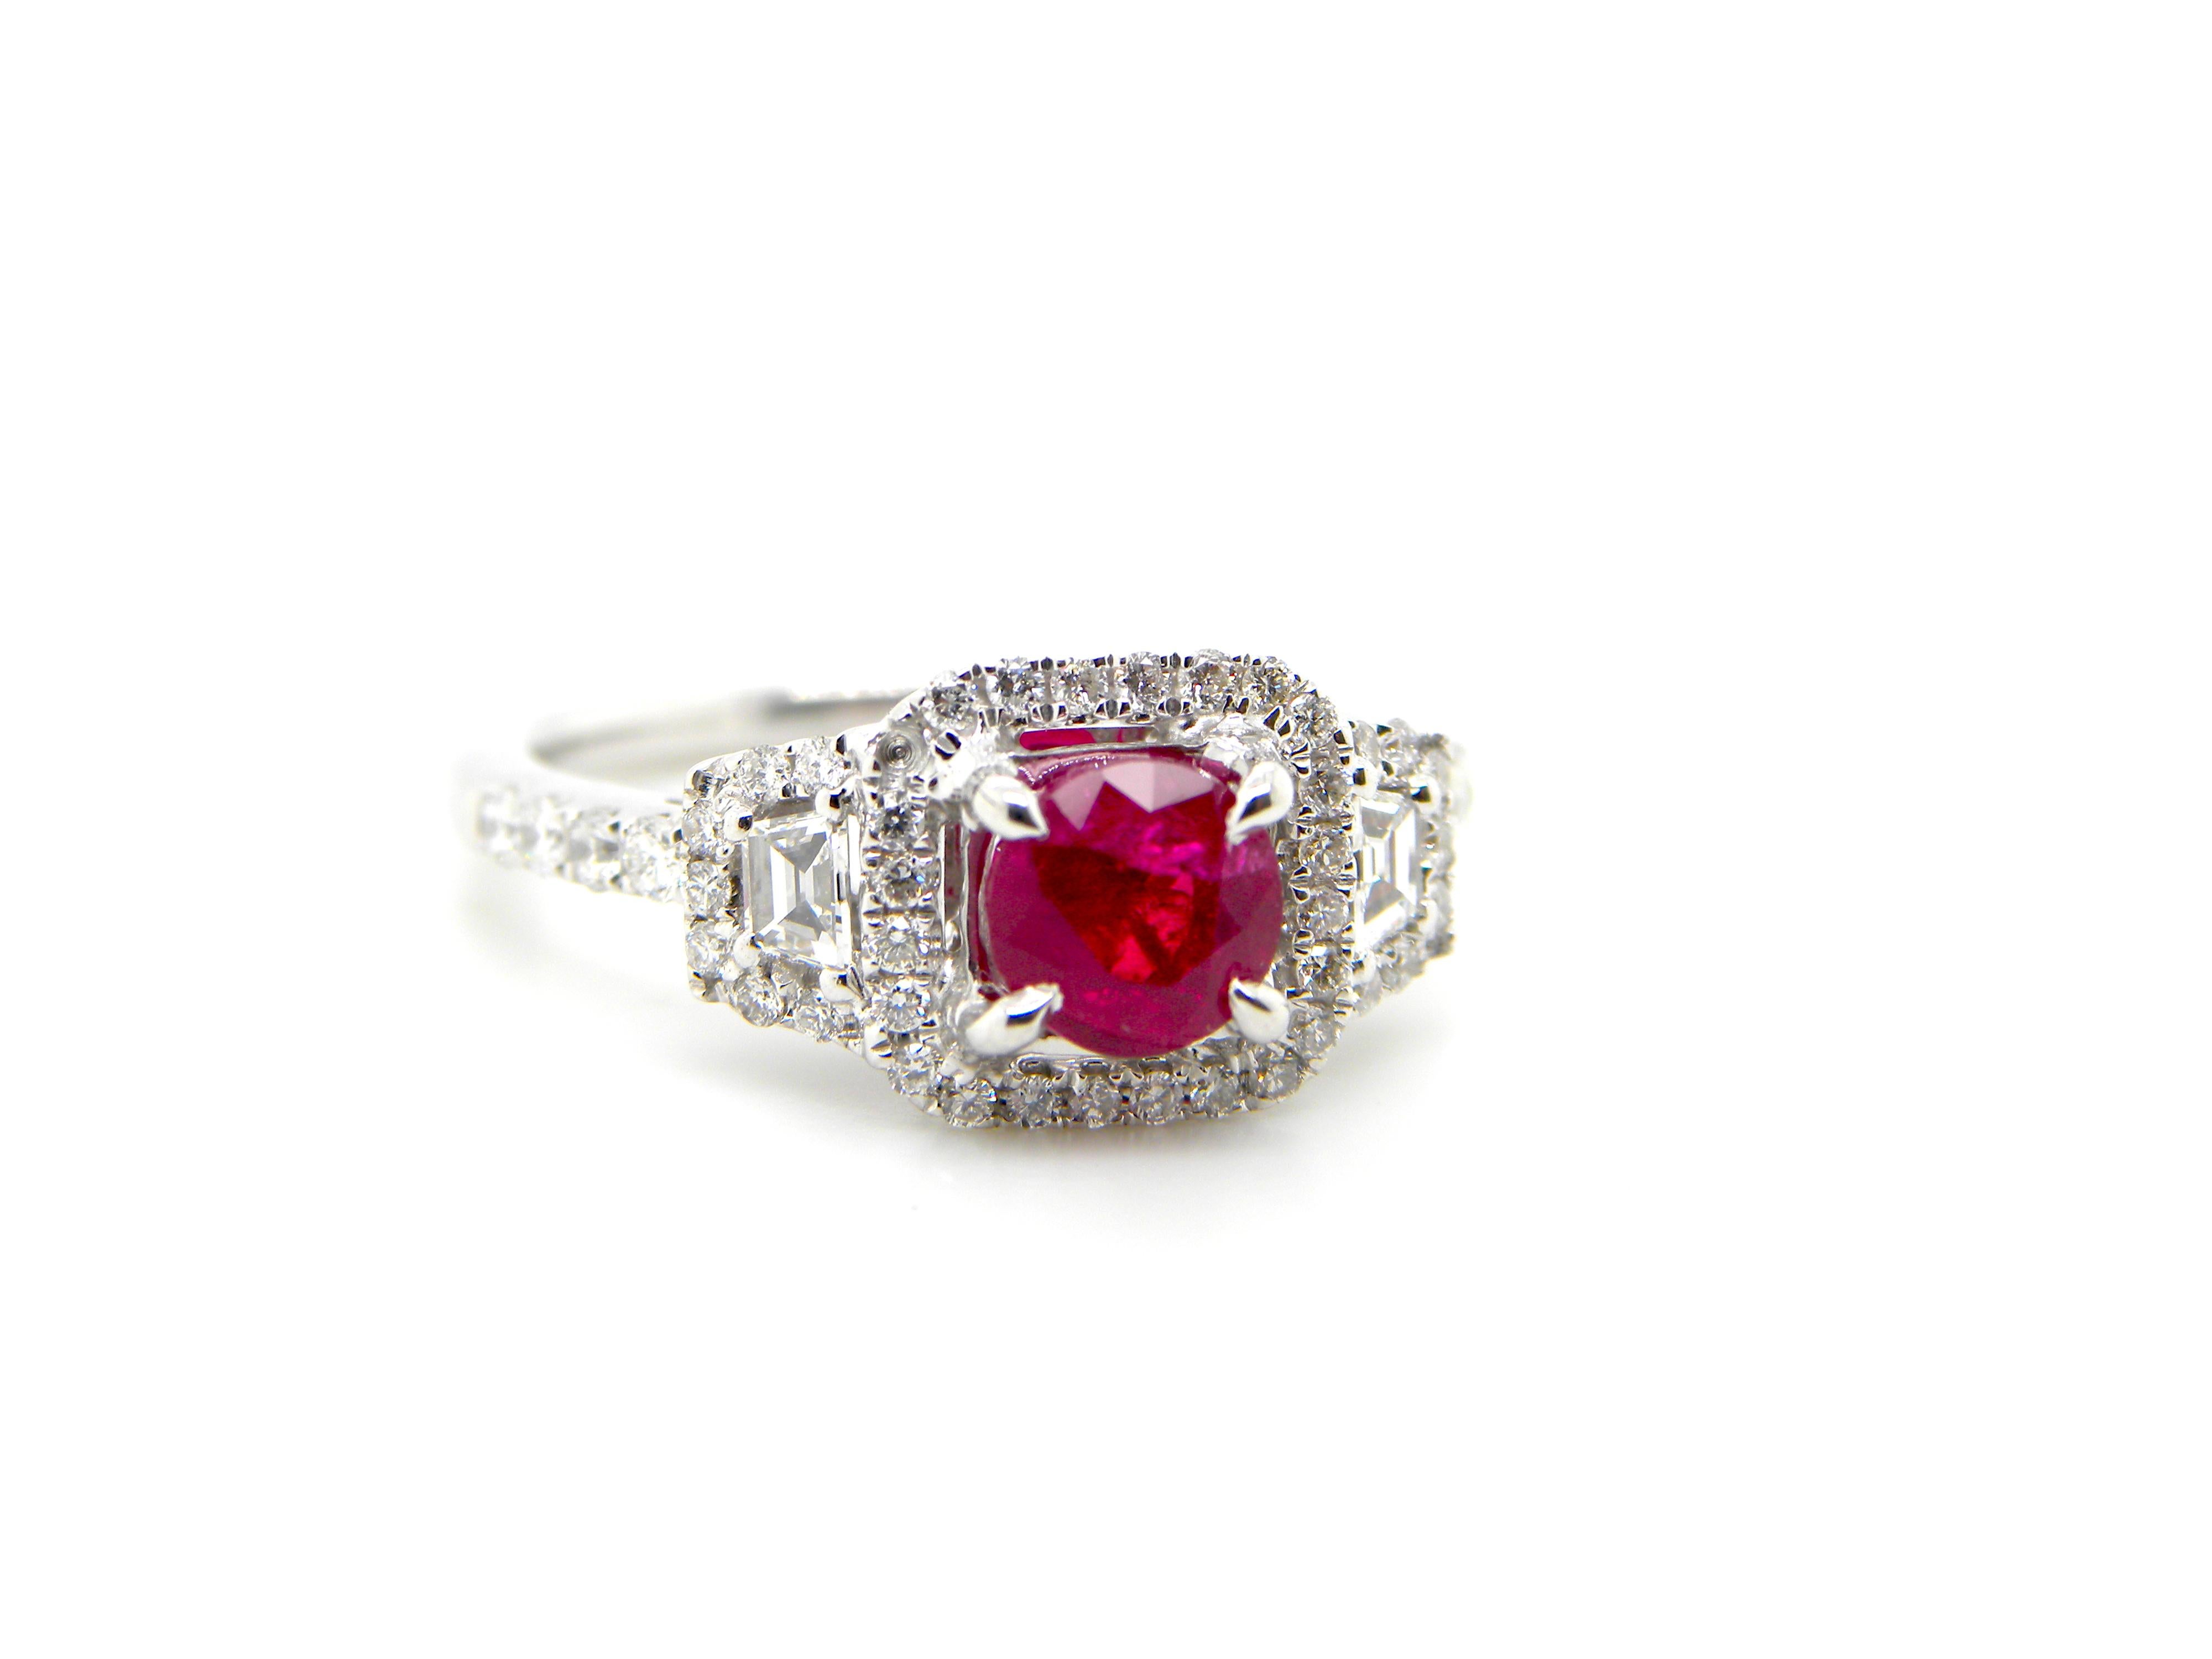 Contemporary 1.12 Carat GIA Certified Unheated Vivid Red Burmese Ruby and Diamond Gold Ring